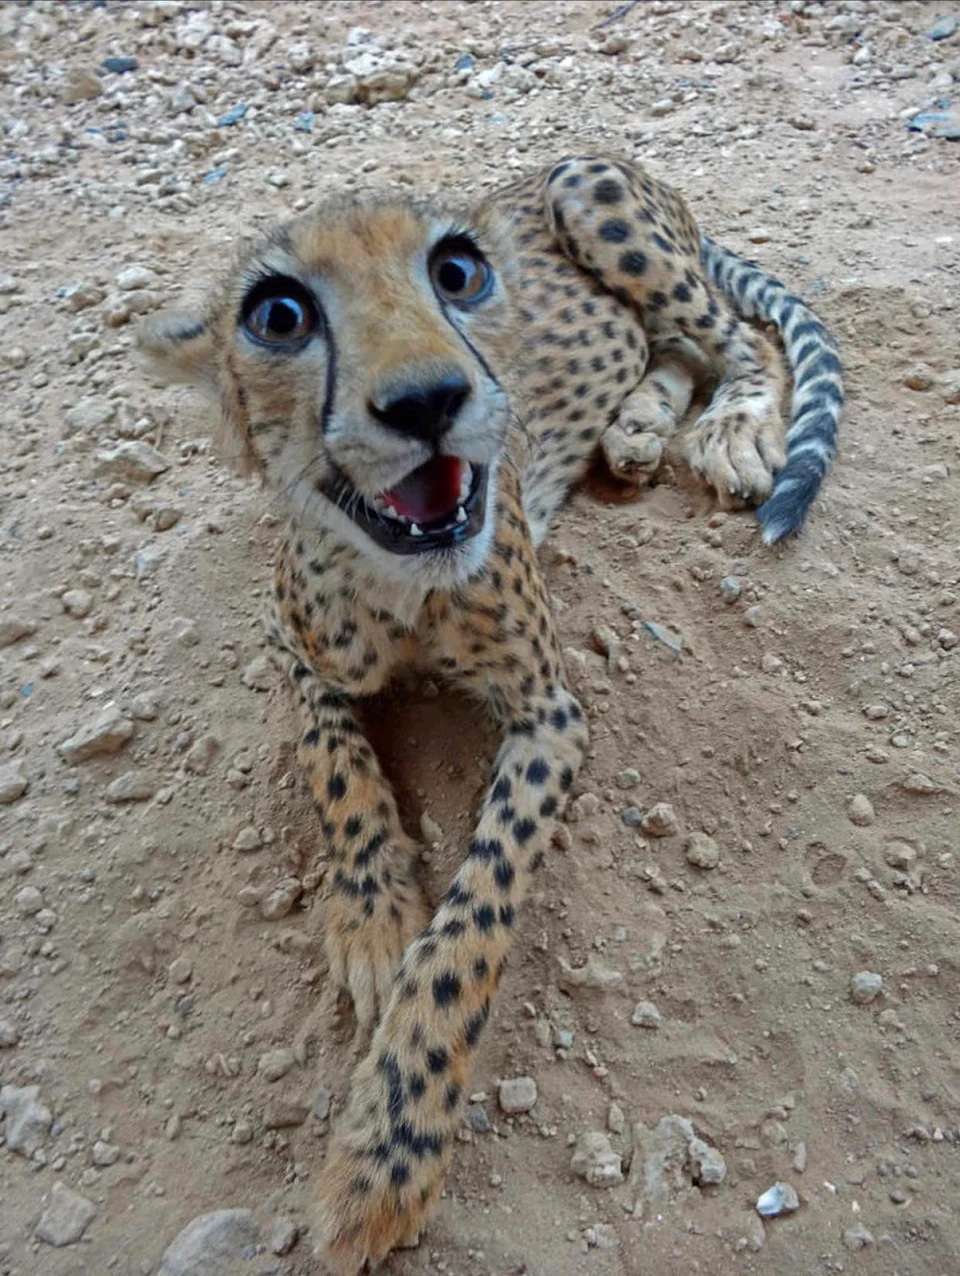 Female cheetah looking as happy as could be